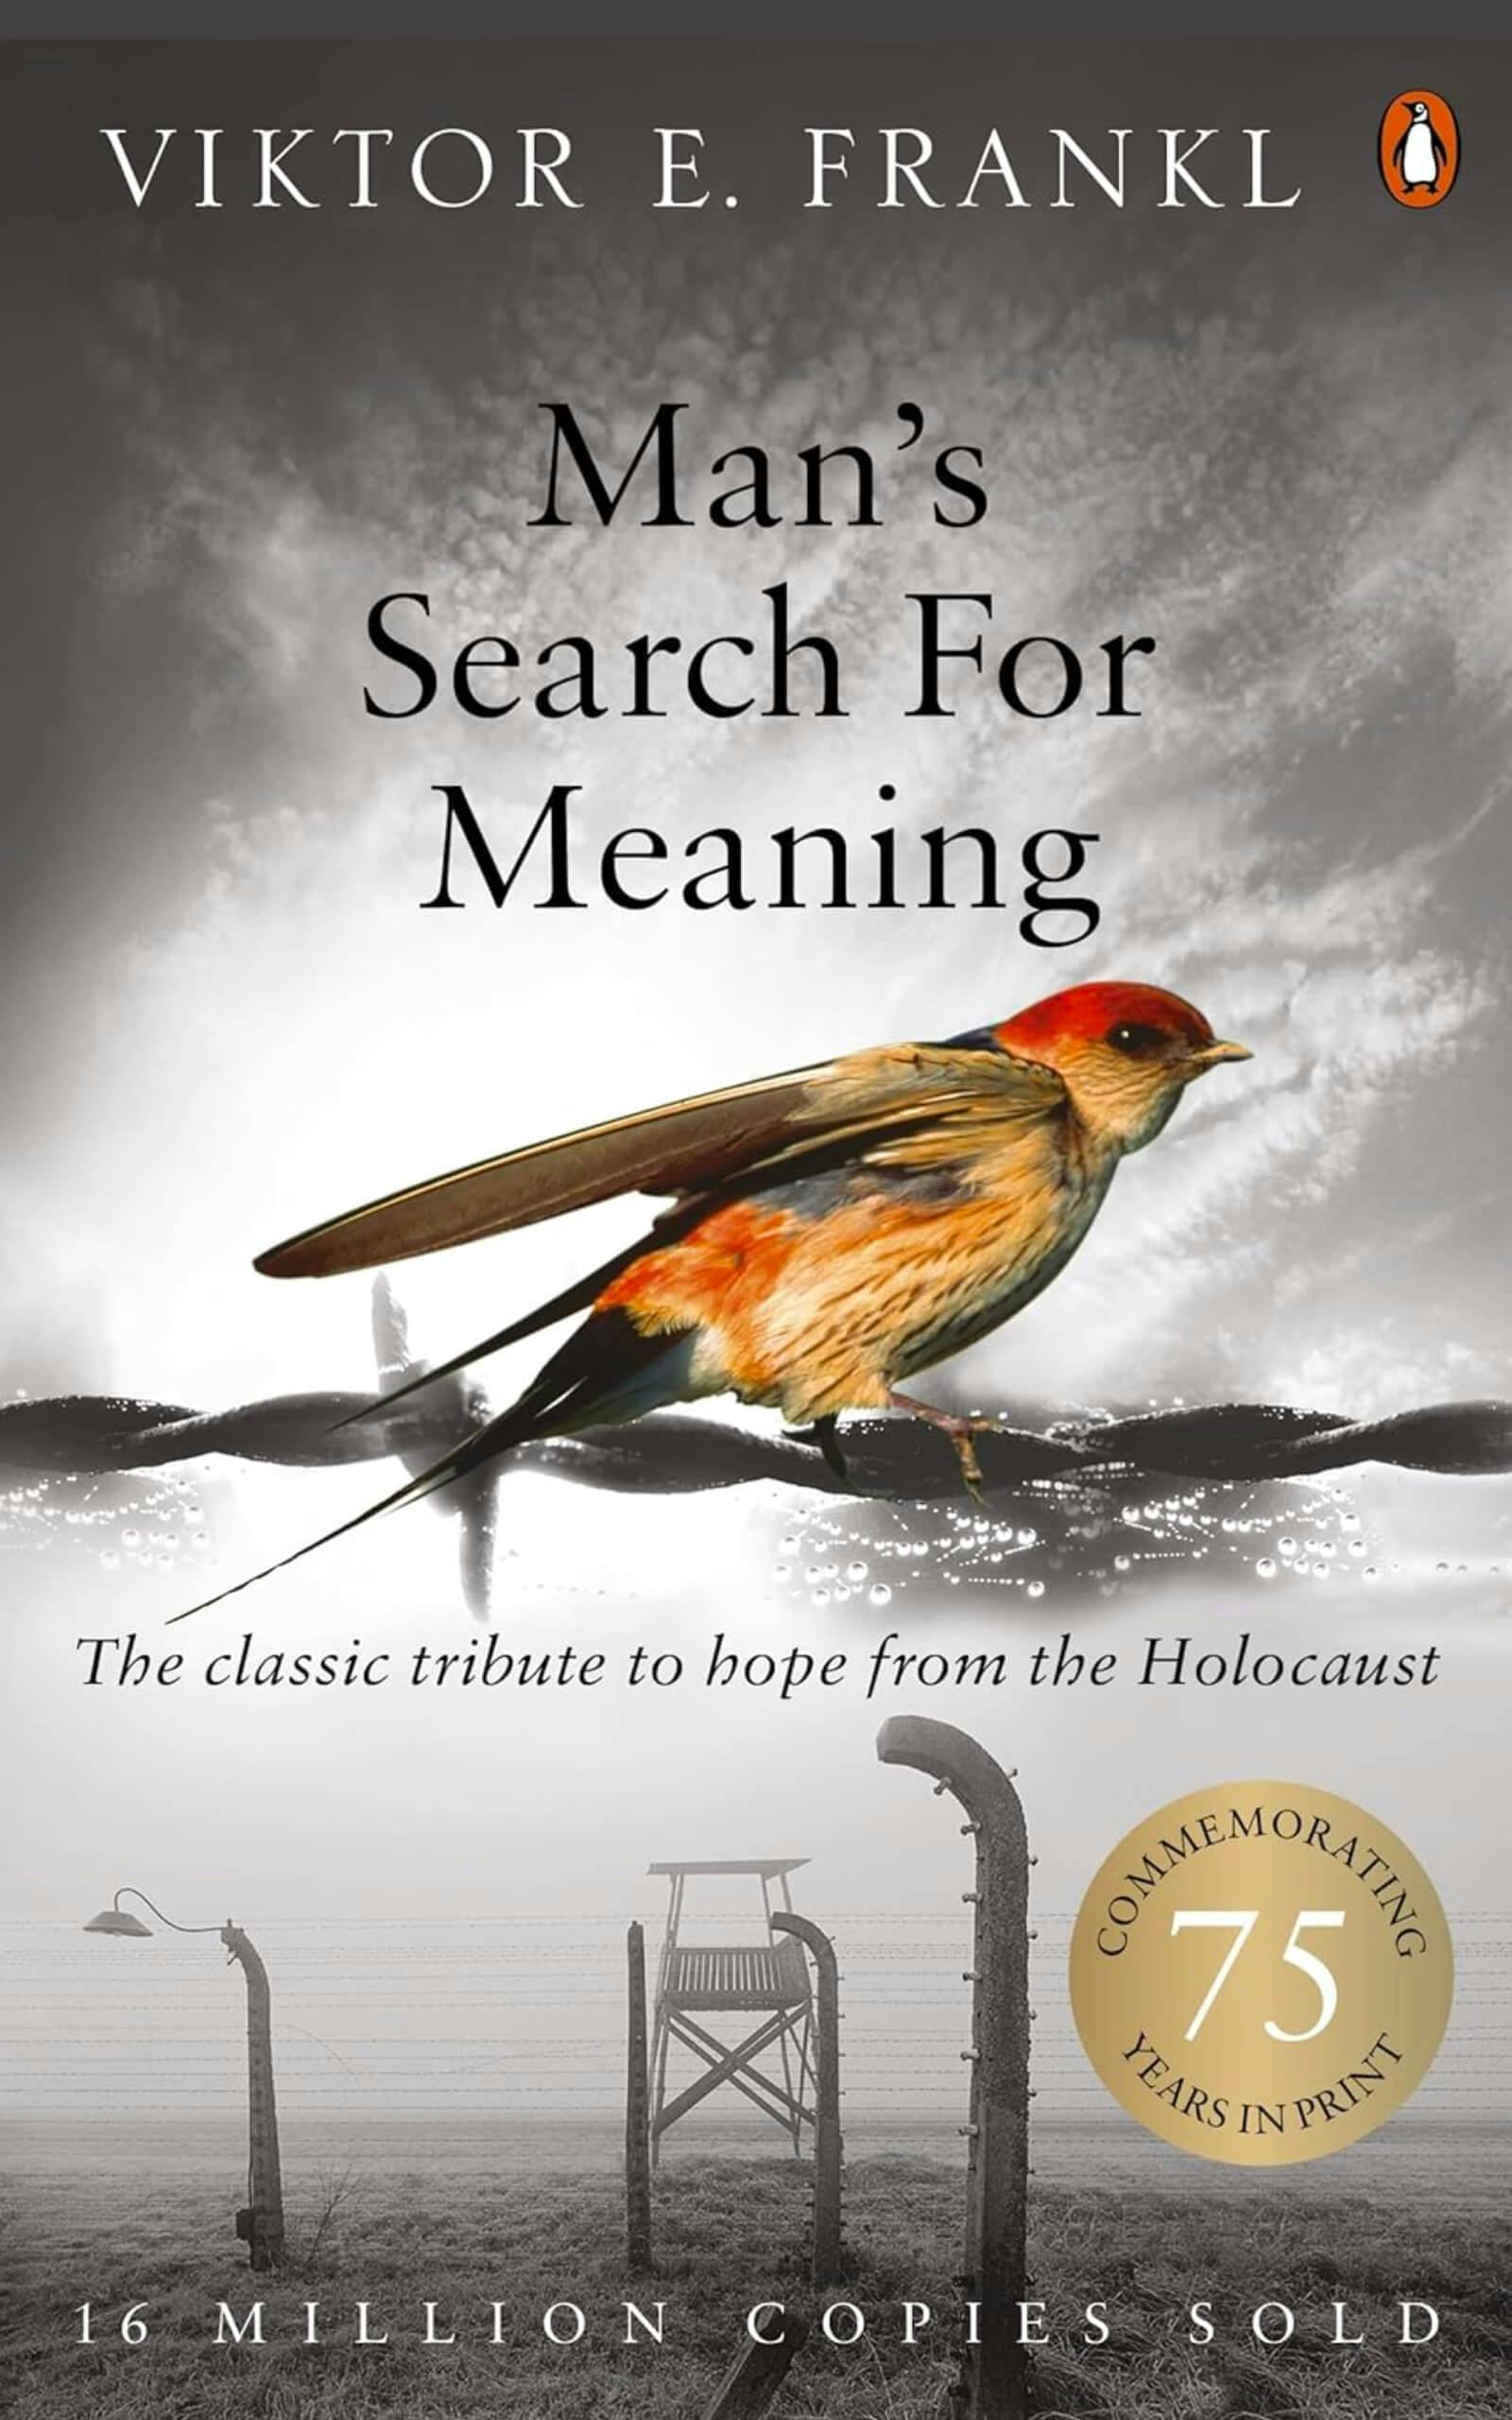 Mans search for meaning by Viktor E. Frankl book cover